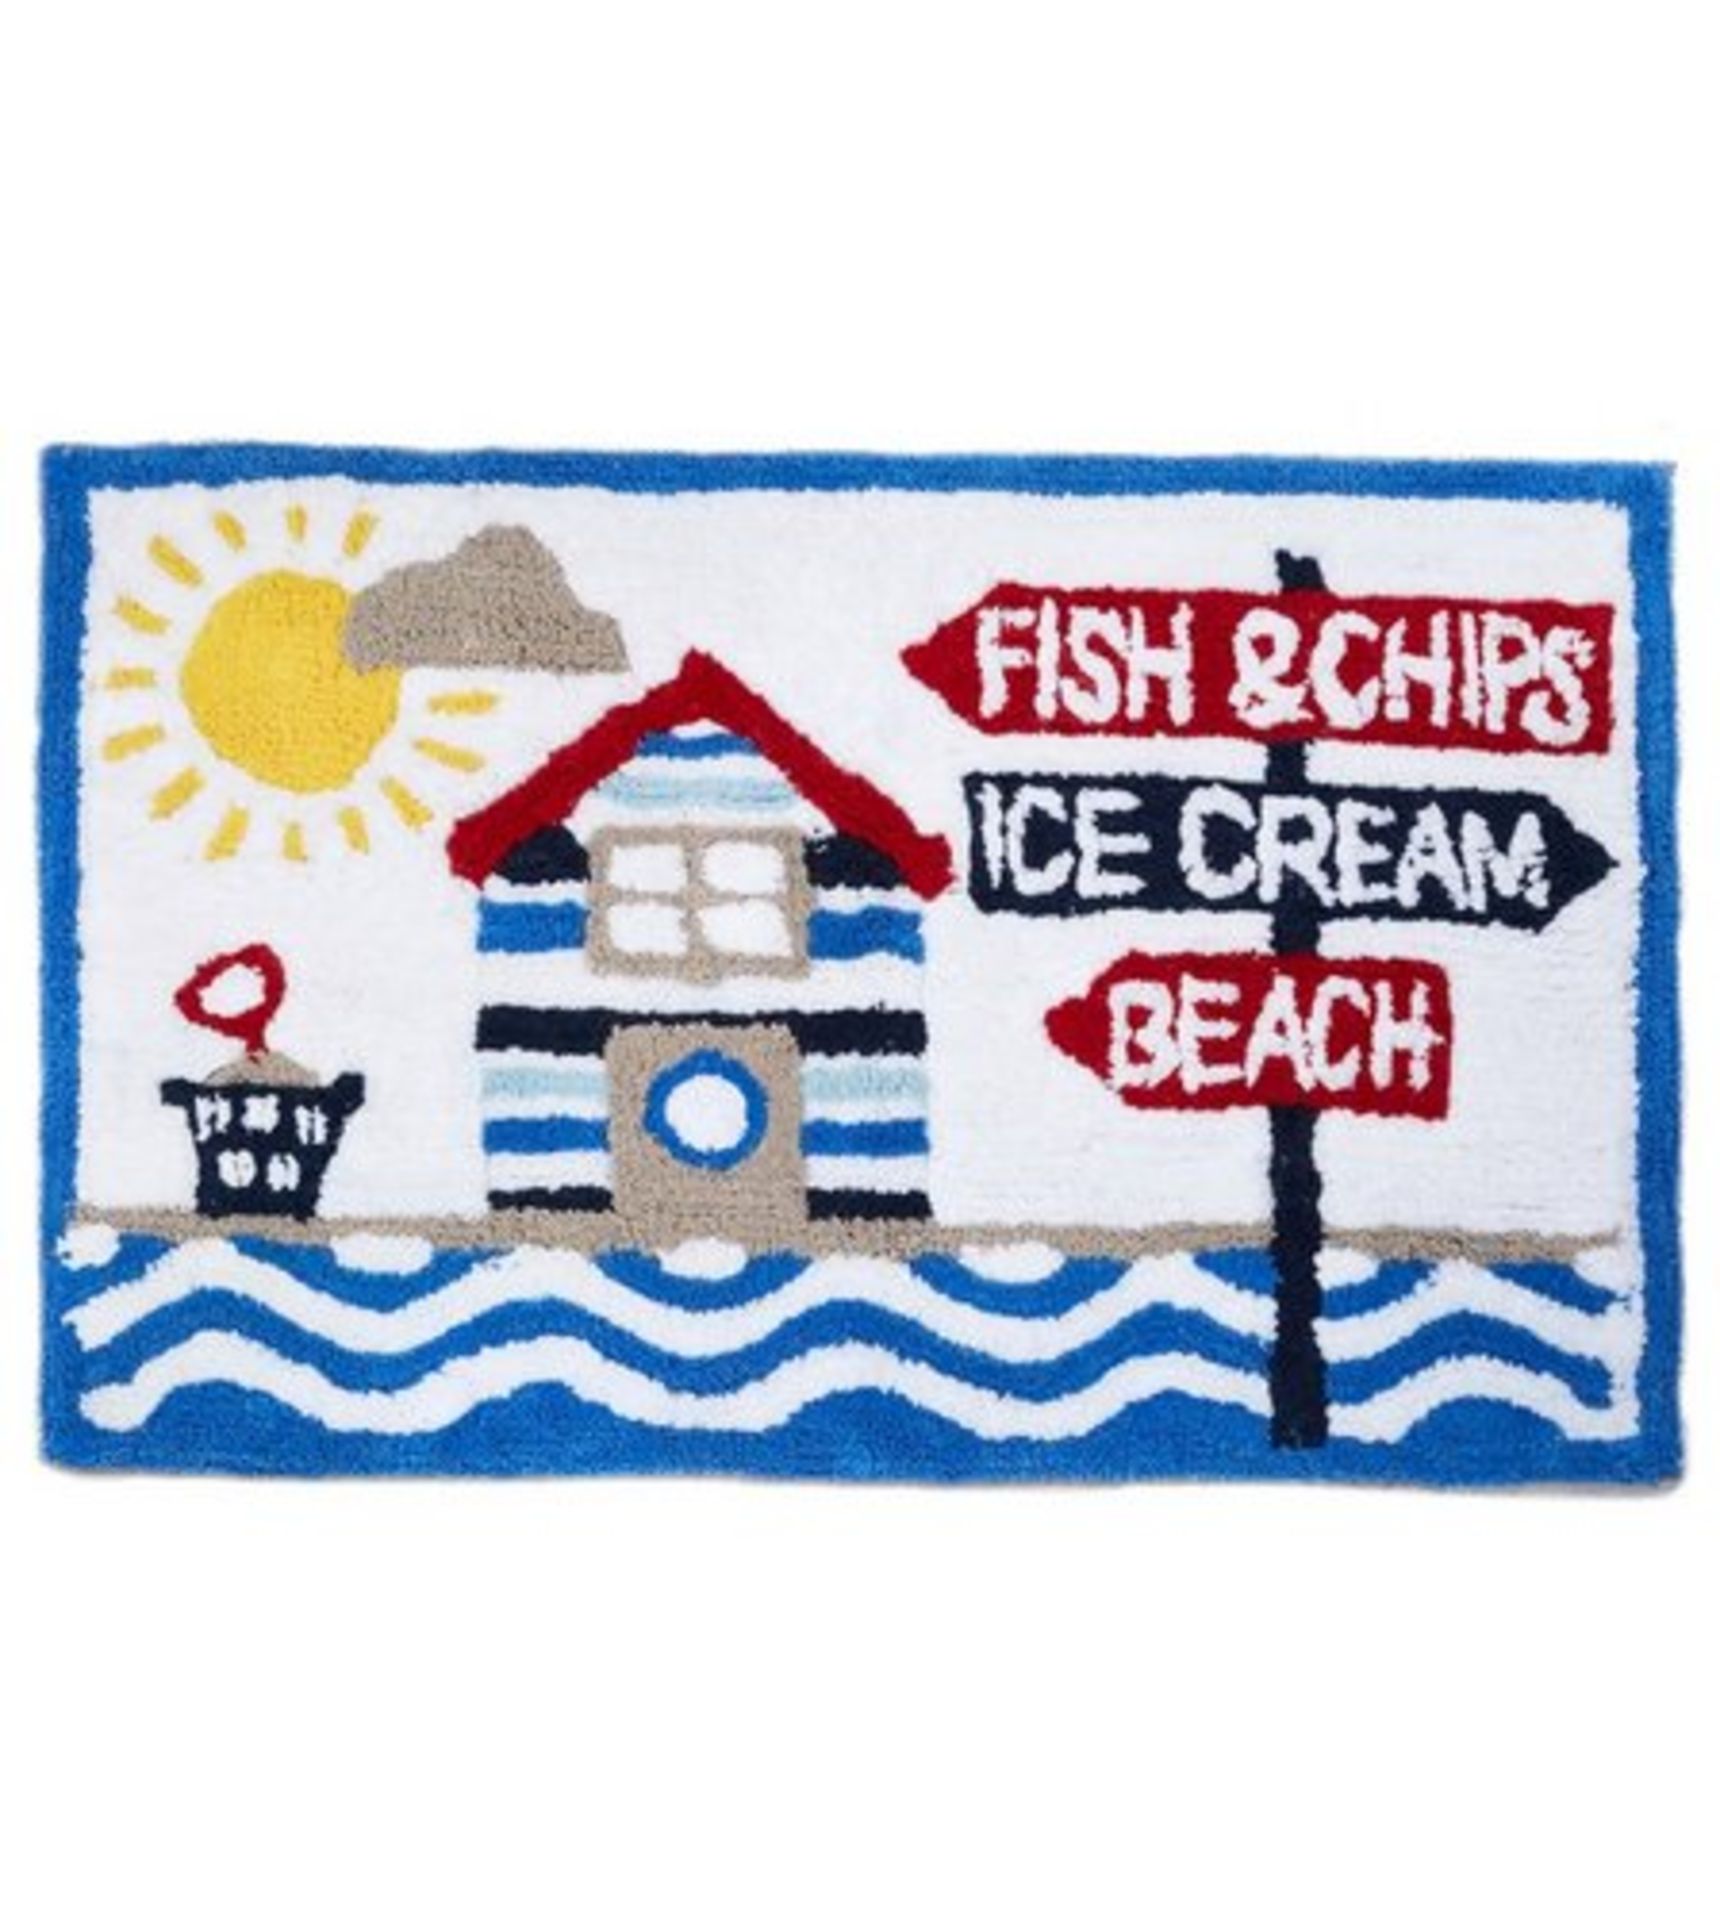 1 AS NEW SEASIDE SCENE TUFTED BATHMAT (VIEWING AVAILABLE)